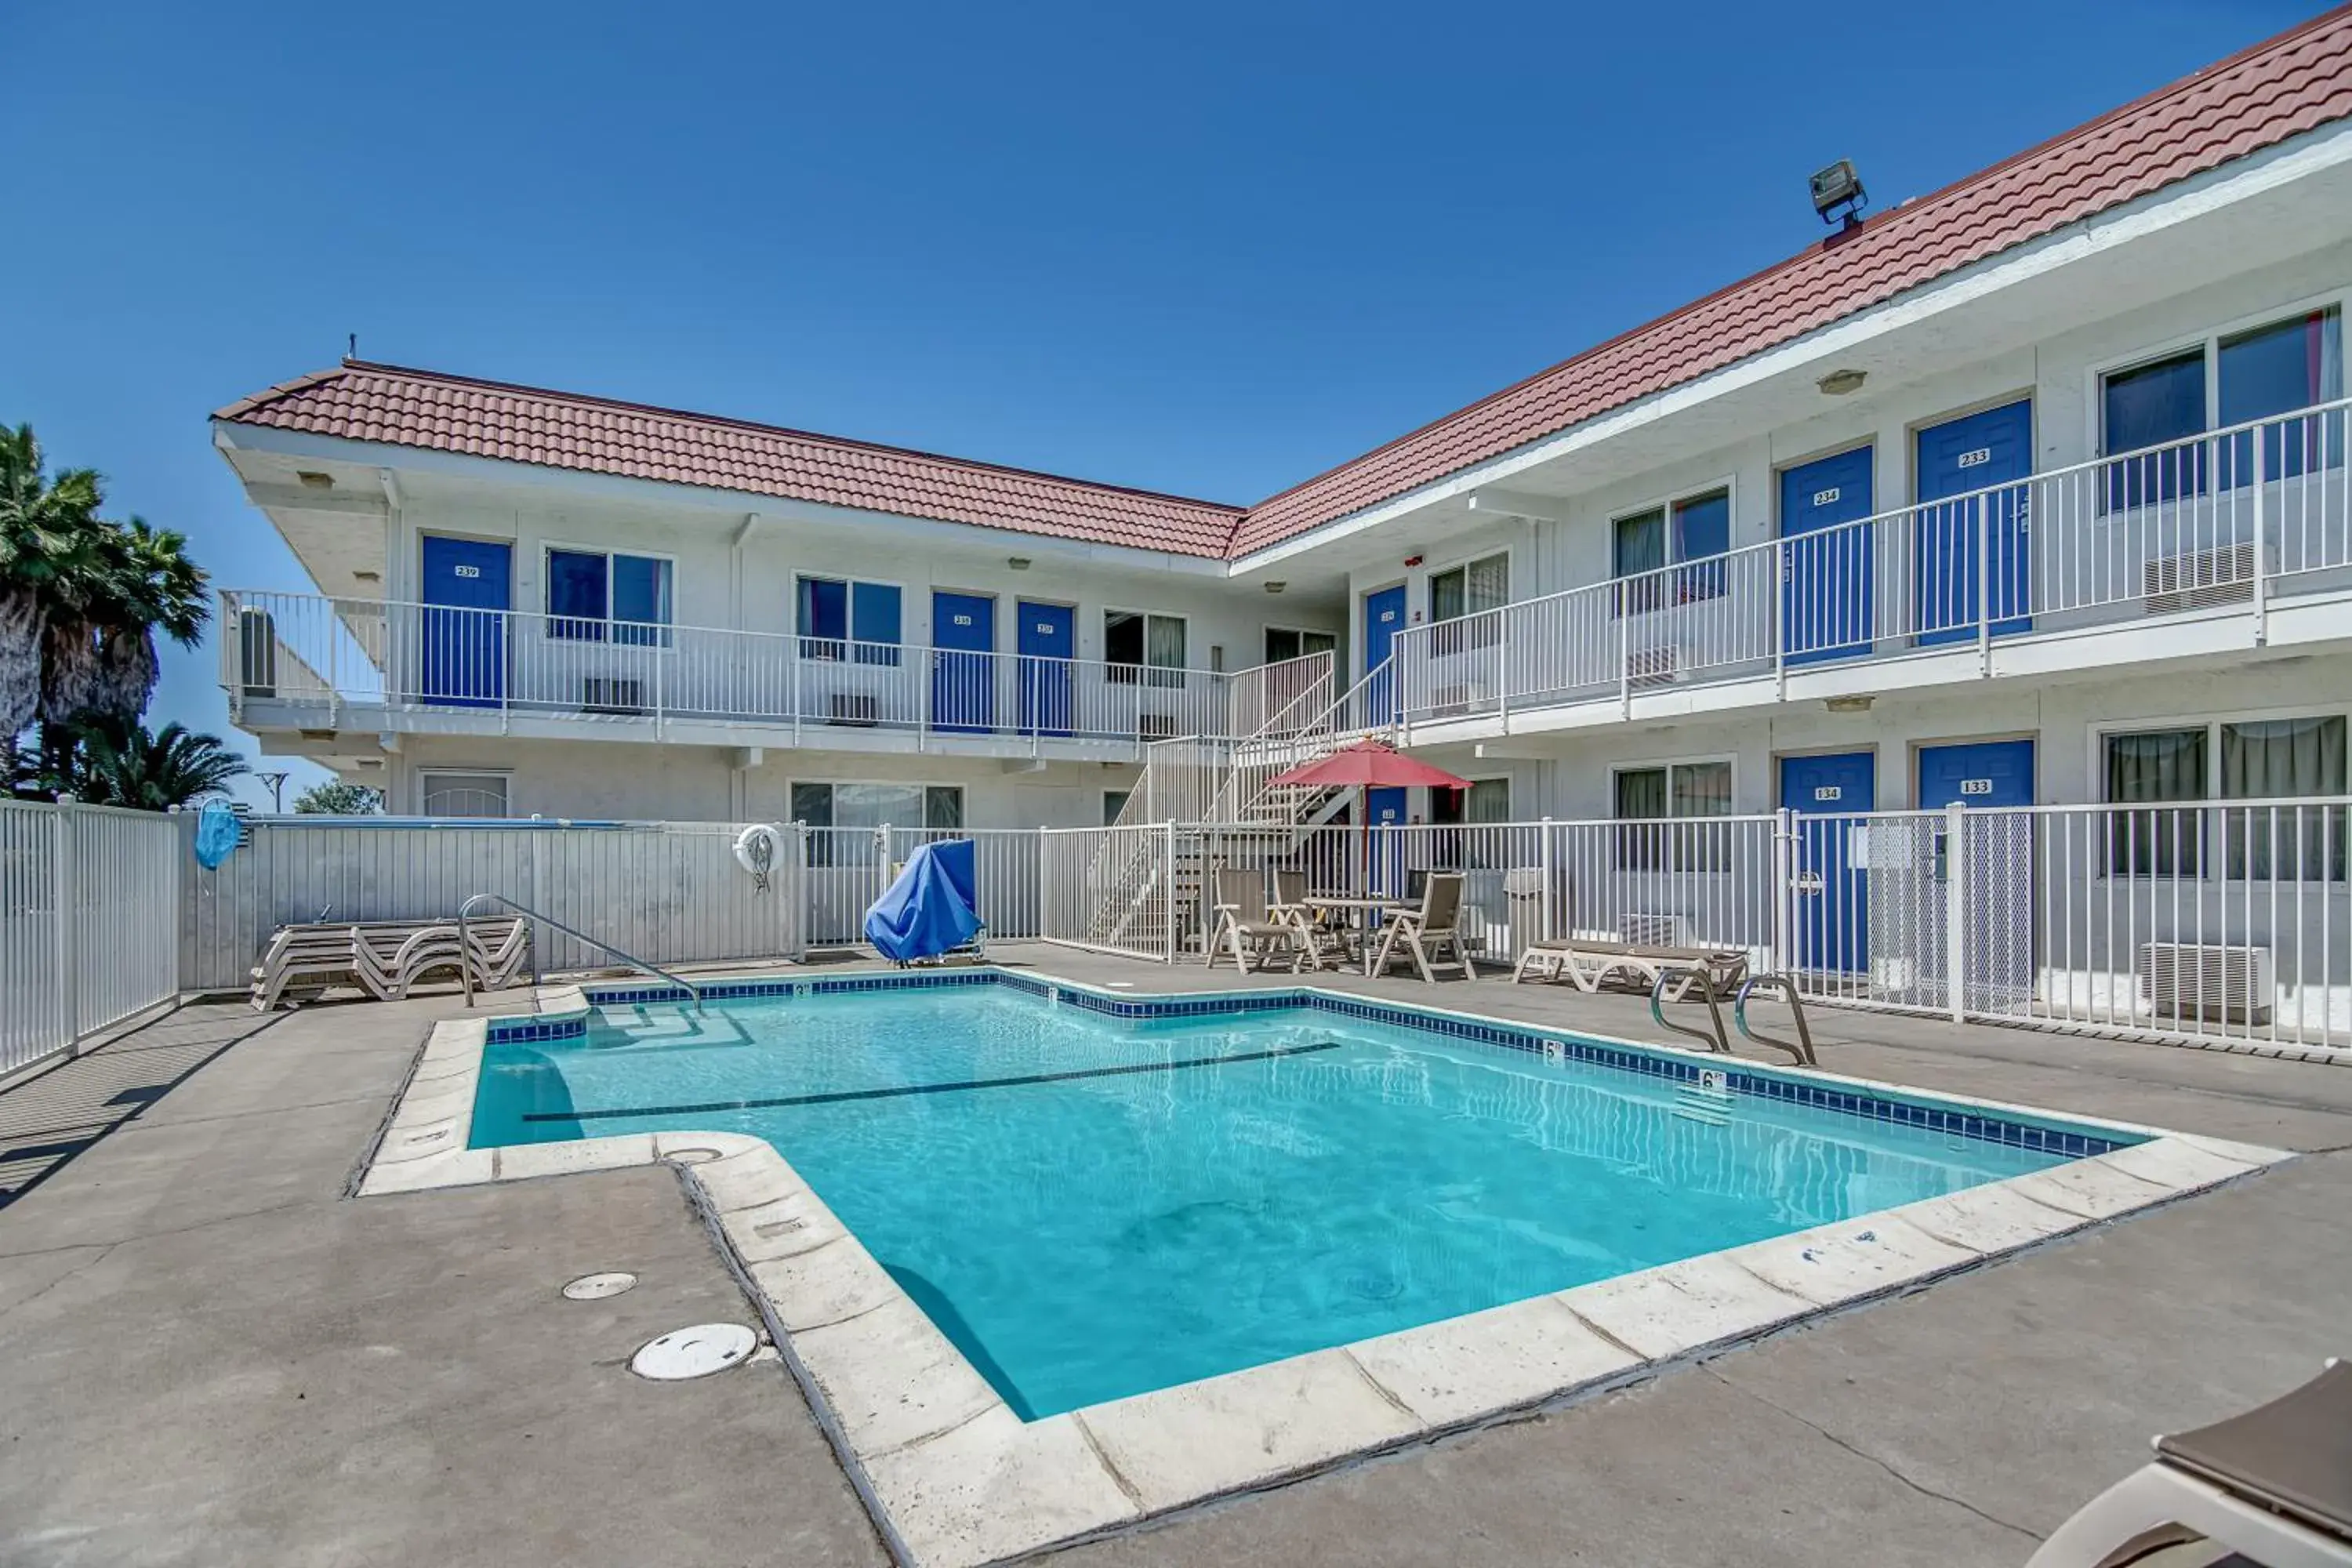 Swimming pool, Property Building in Motel 6-Stockton, CA - Charter Way West